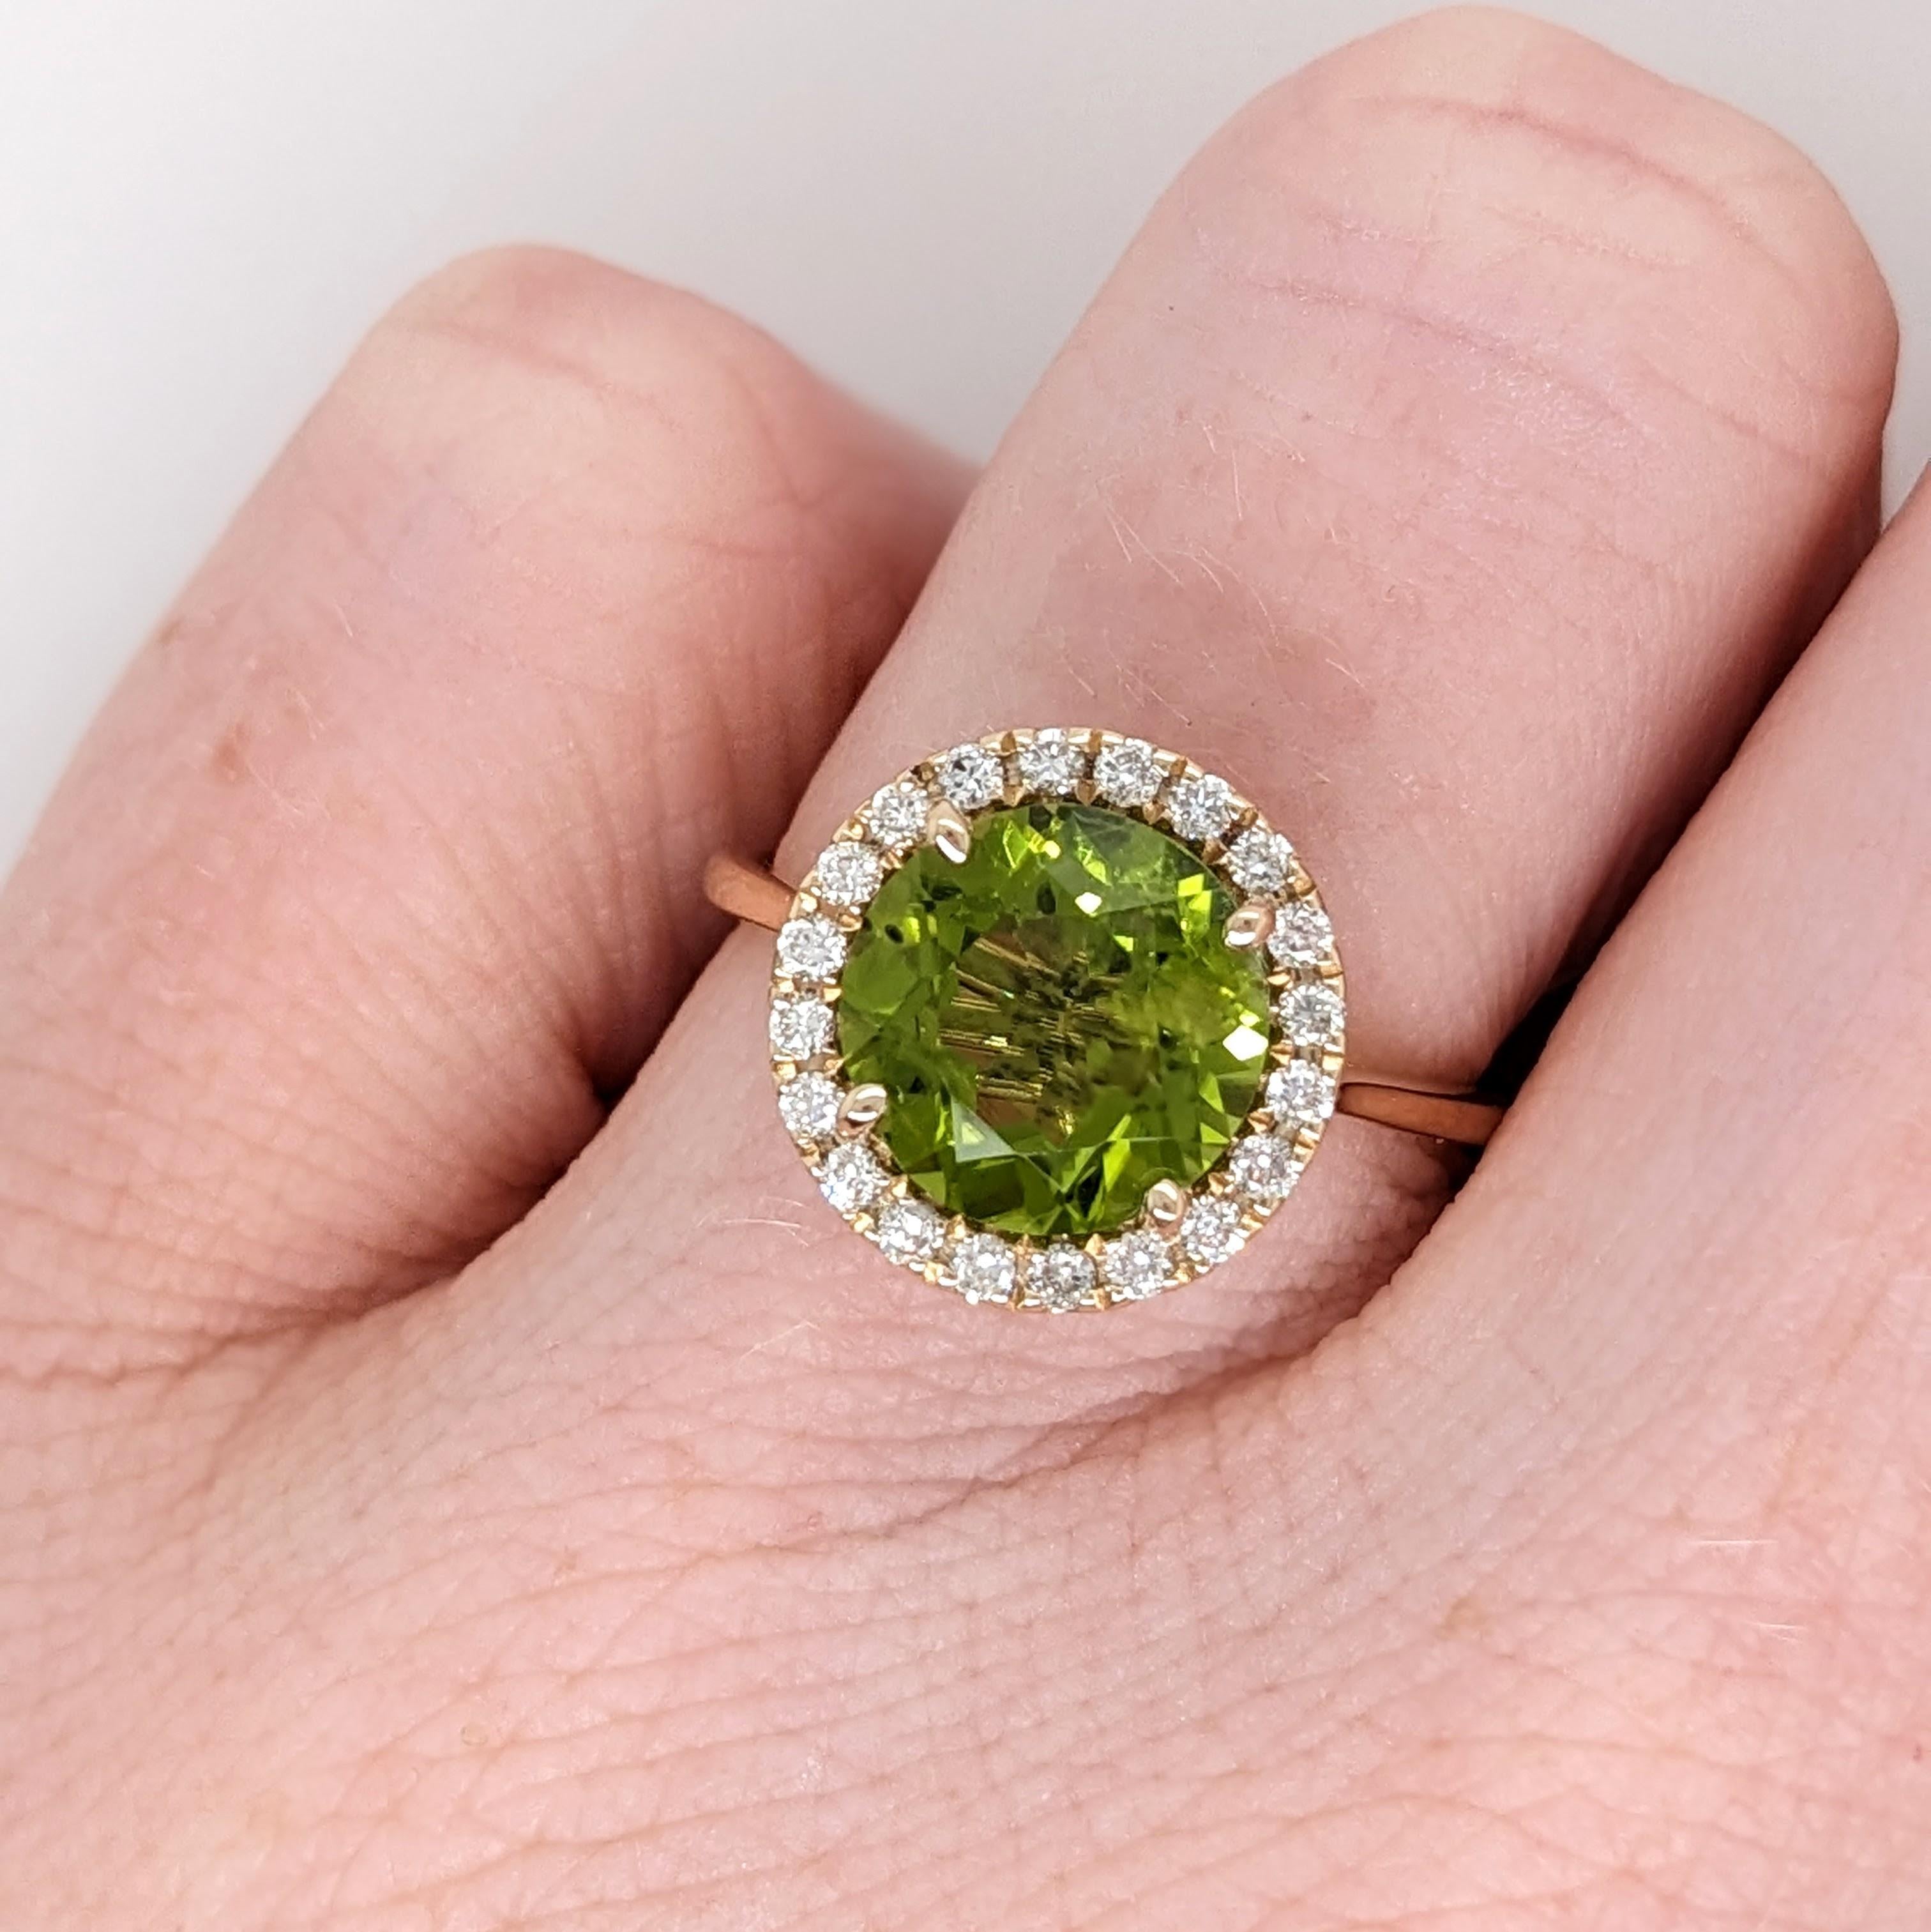 2.7ct Sparkling Peridot Ring w Natural Diamonds in Solid 14k Gold Round 9mm In New Condition For Sale In Columbus, OH